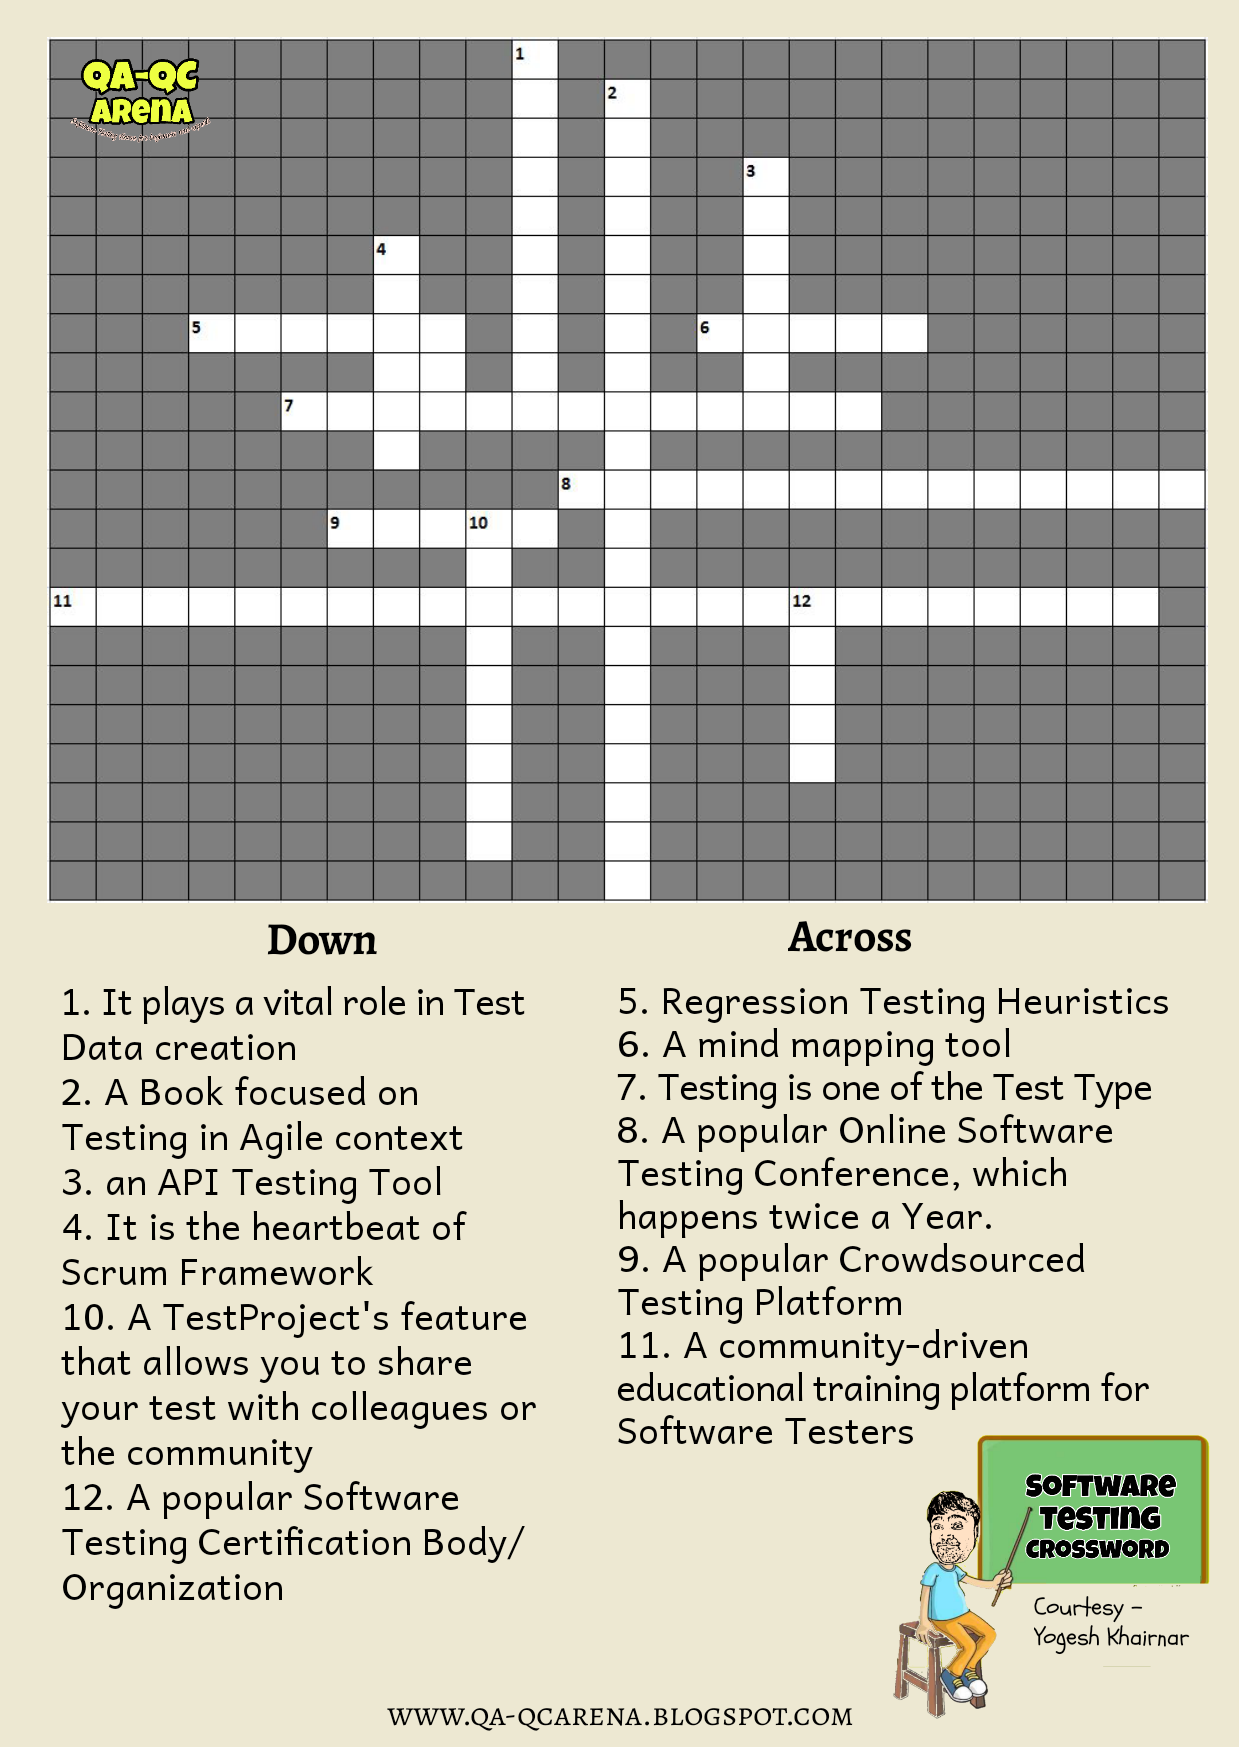 QAQC Arena Software Testing Crossword Answers (Series 3)